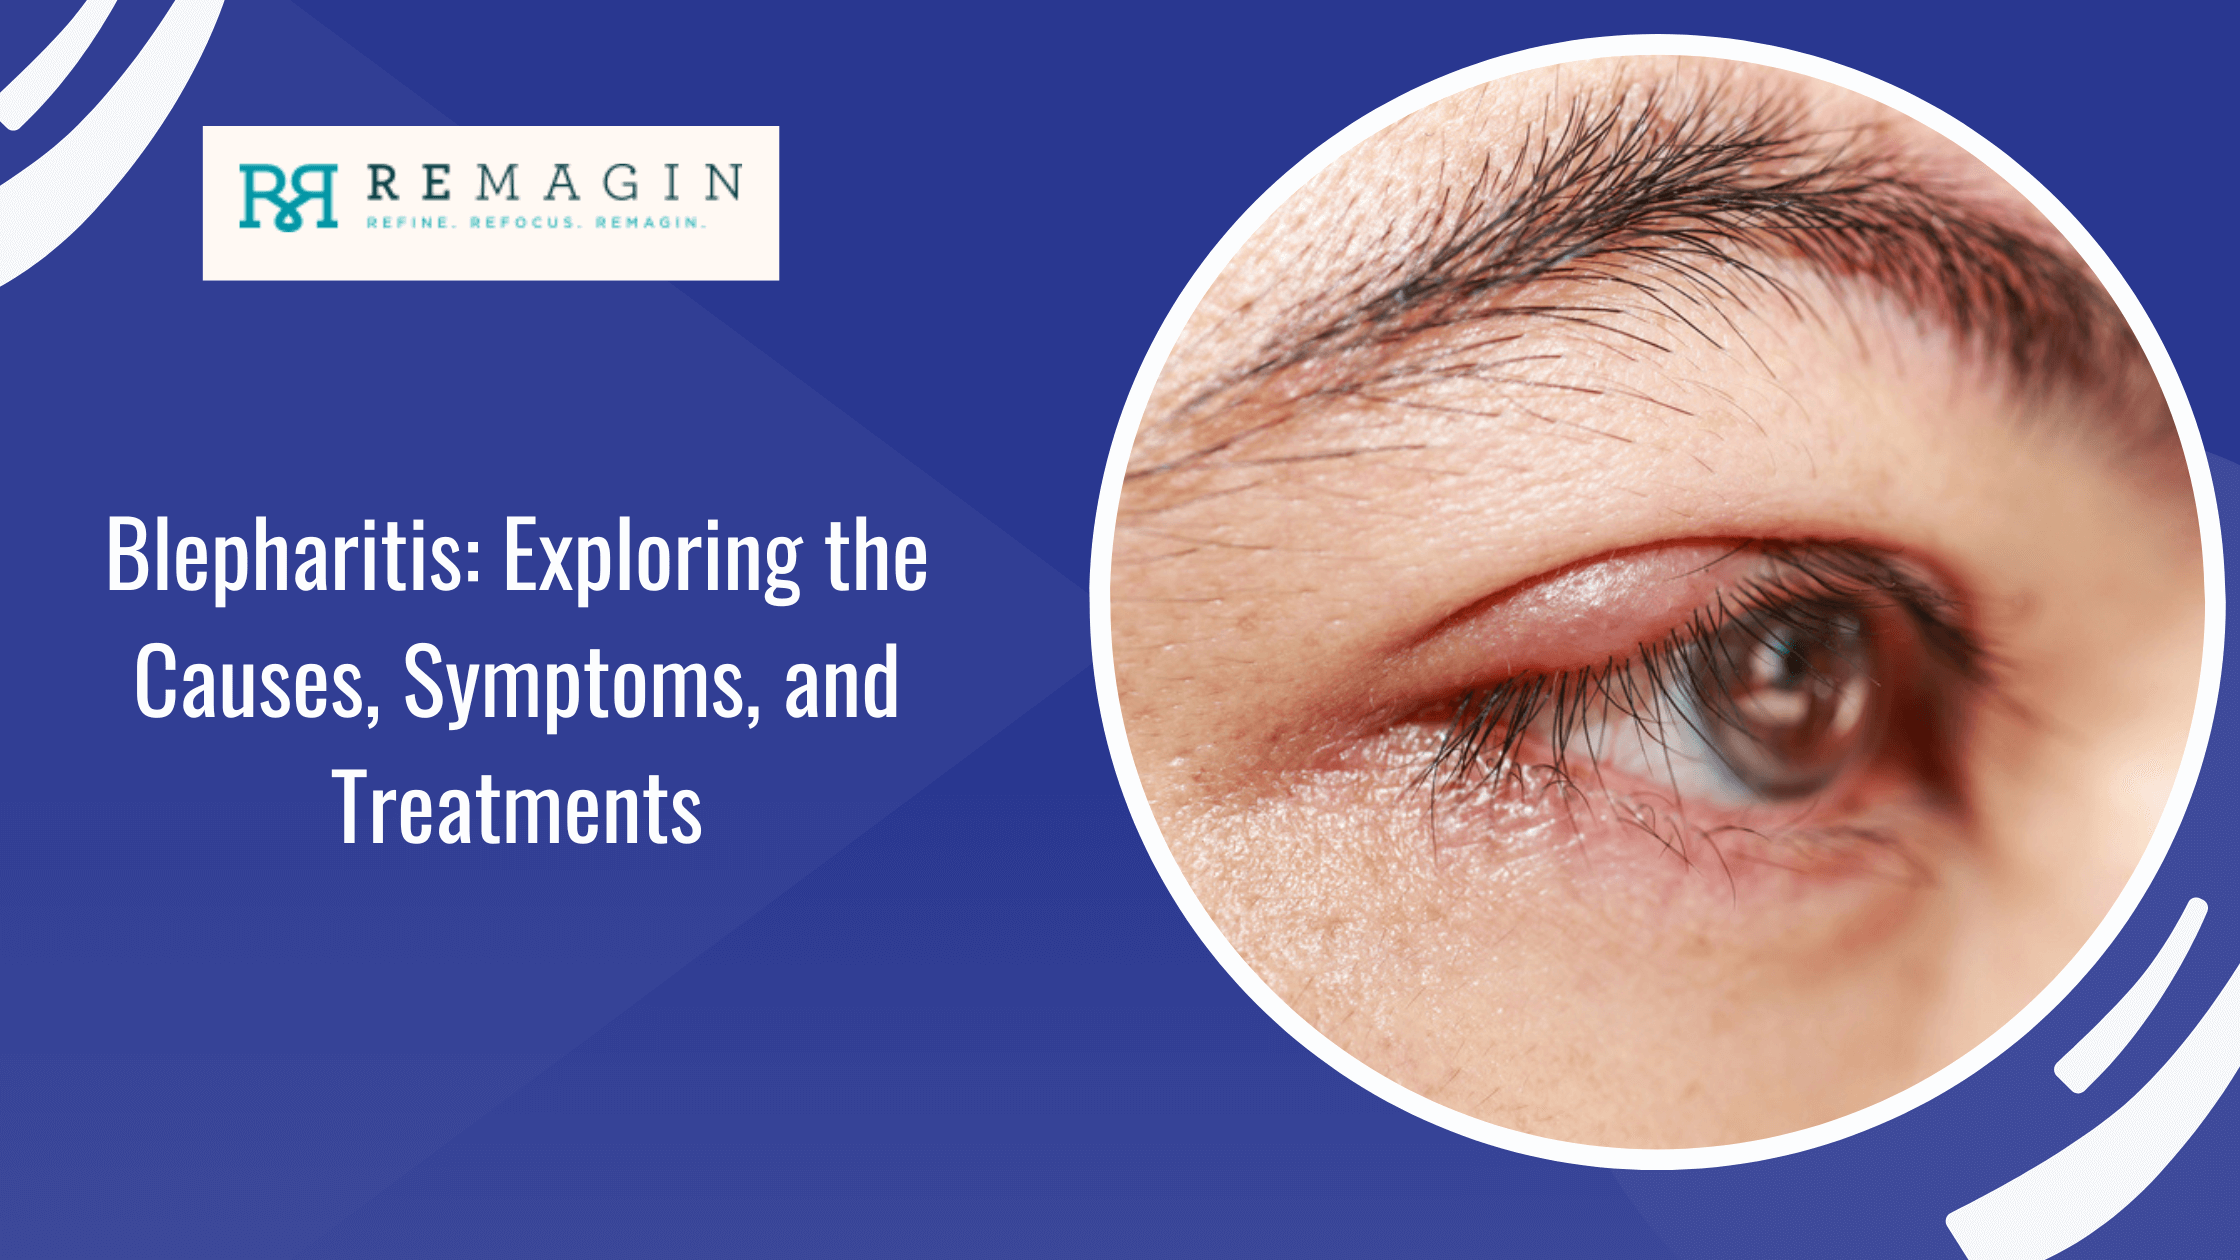 Blepharitis: Exploring the Causes, Symptoms, and Treatments